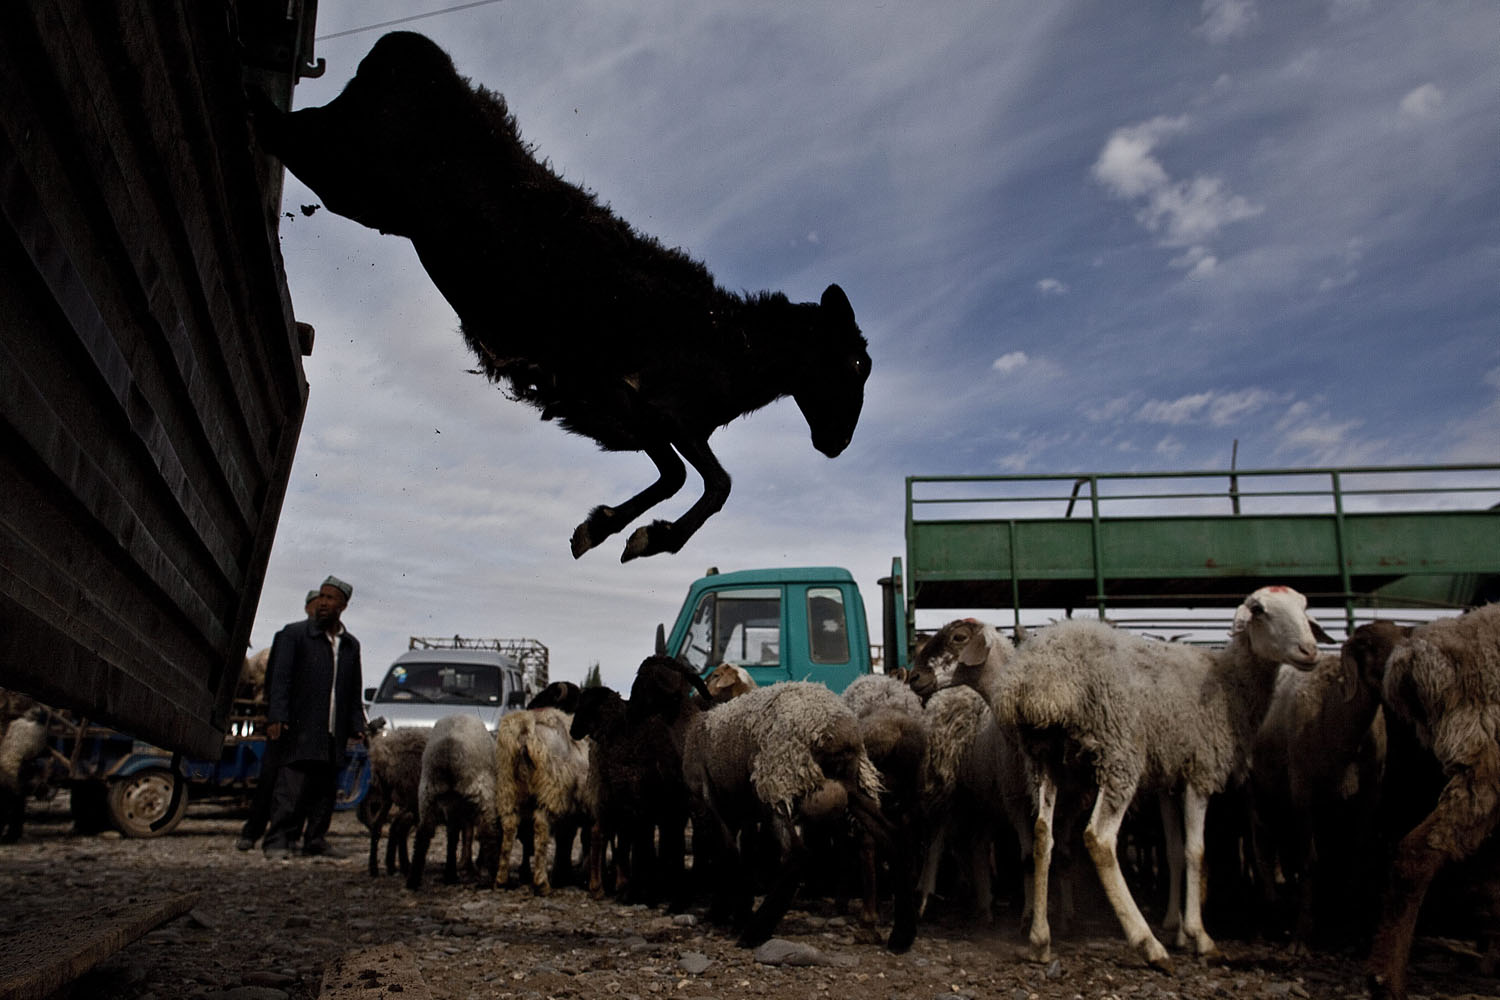 May 26, 2013. A sheep belonging to people of the Uighur ethnic minority load jump off a truck as herders bring their livestock for sale at the Sunday livestock market in Kashgar, western edge of the Xinjiang Uighur Autonomous Region, China.